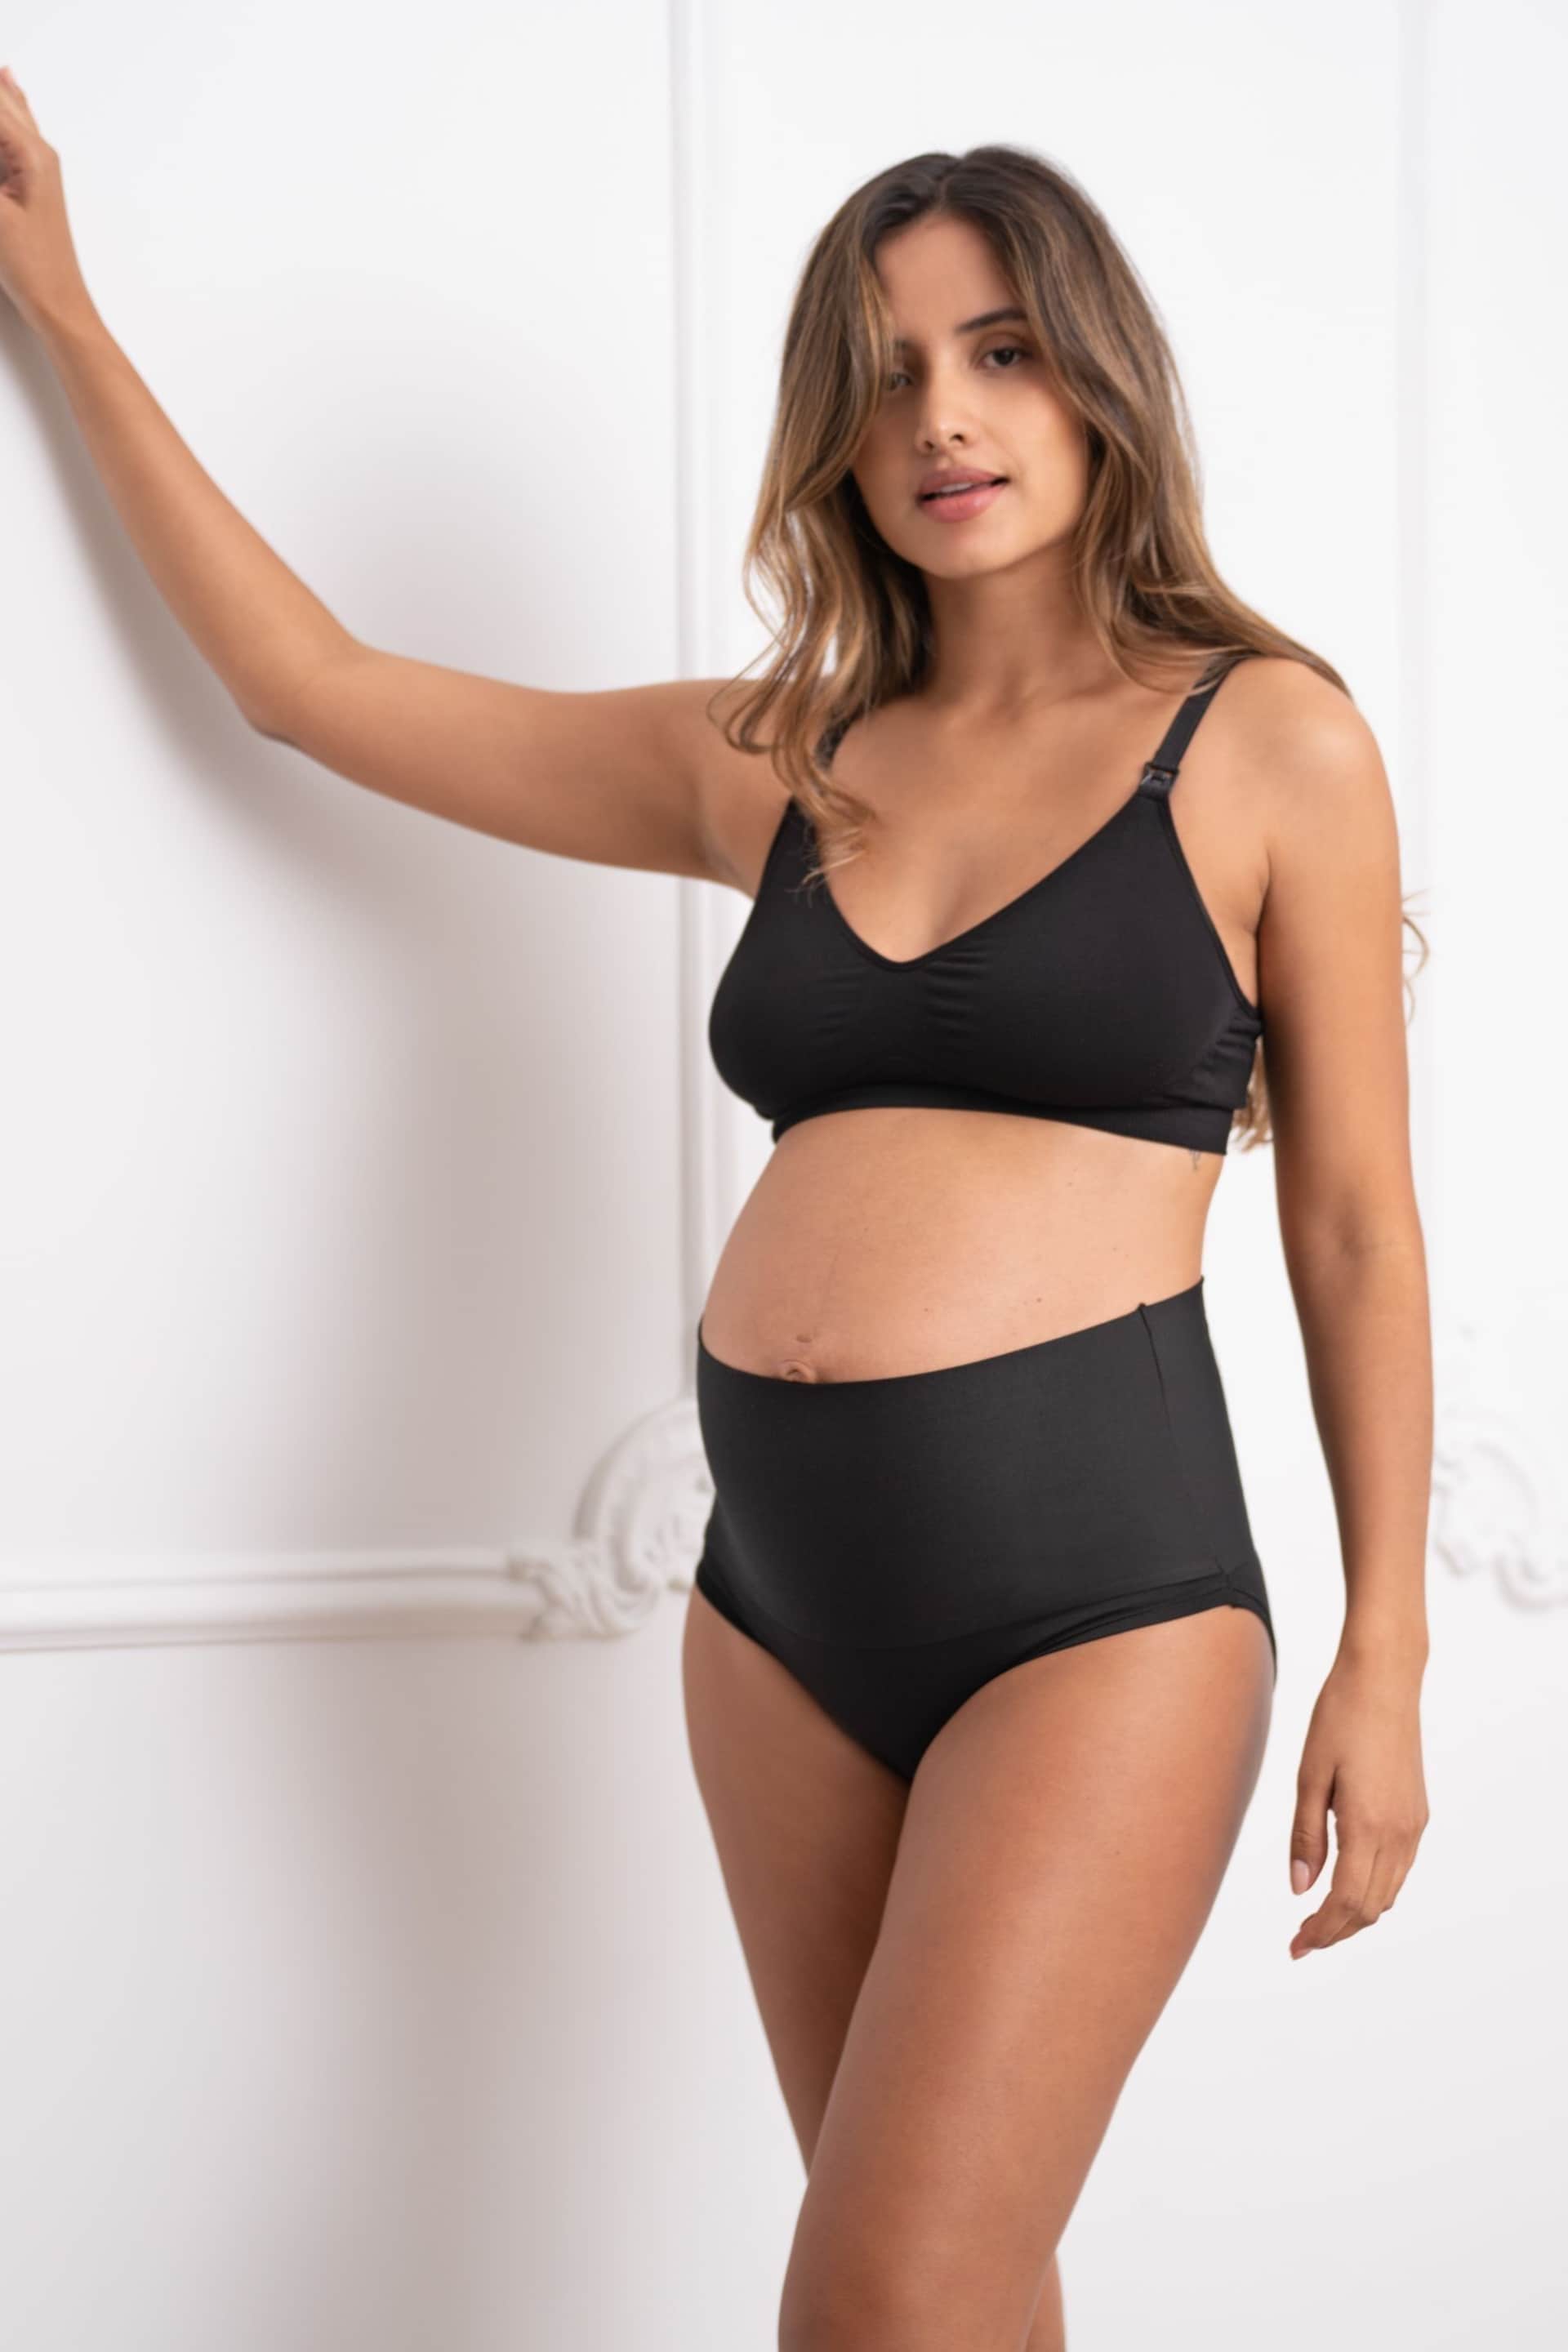 Seraphine Folded Waist Black Maternity and Post Maternity Briefs 2 Pack - Image 2 of 8